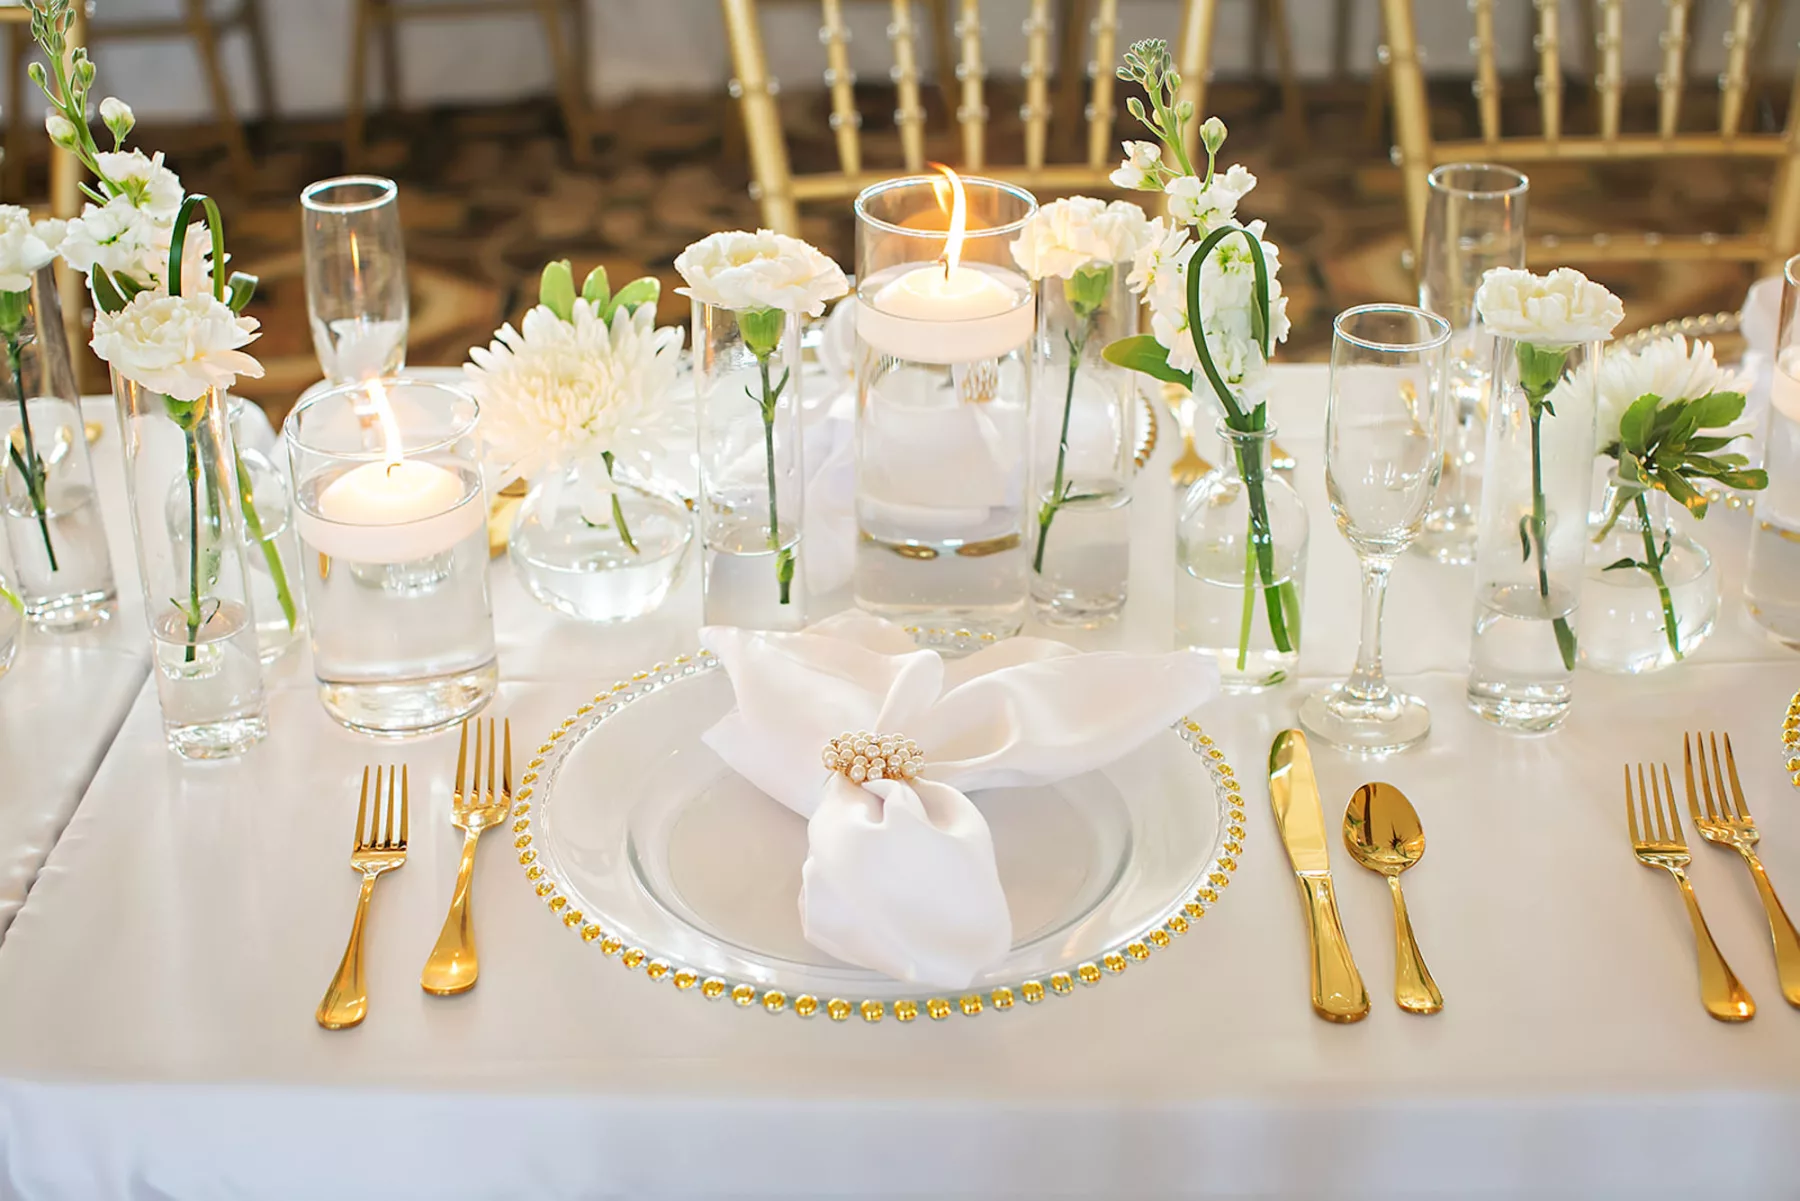 White Monochromatic Wedding Reception Centerpiece Decor Inspiration | Gold Rimmed Beaded Chargers, Gold Flatware | Floating Candles, White Carnations and Chrysanthemums in Tall Glass Bud Vase Flower Arrangement Ideas | Tampa Planner Coastal Coordinating | Outside the Box Event Rentals